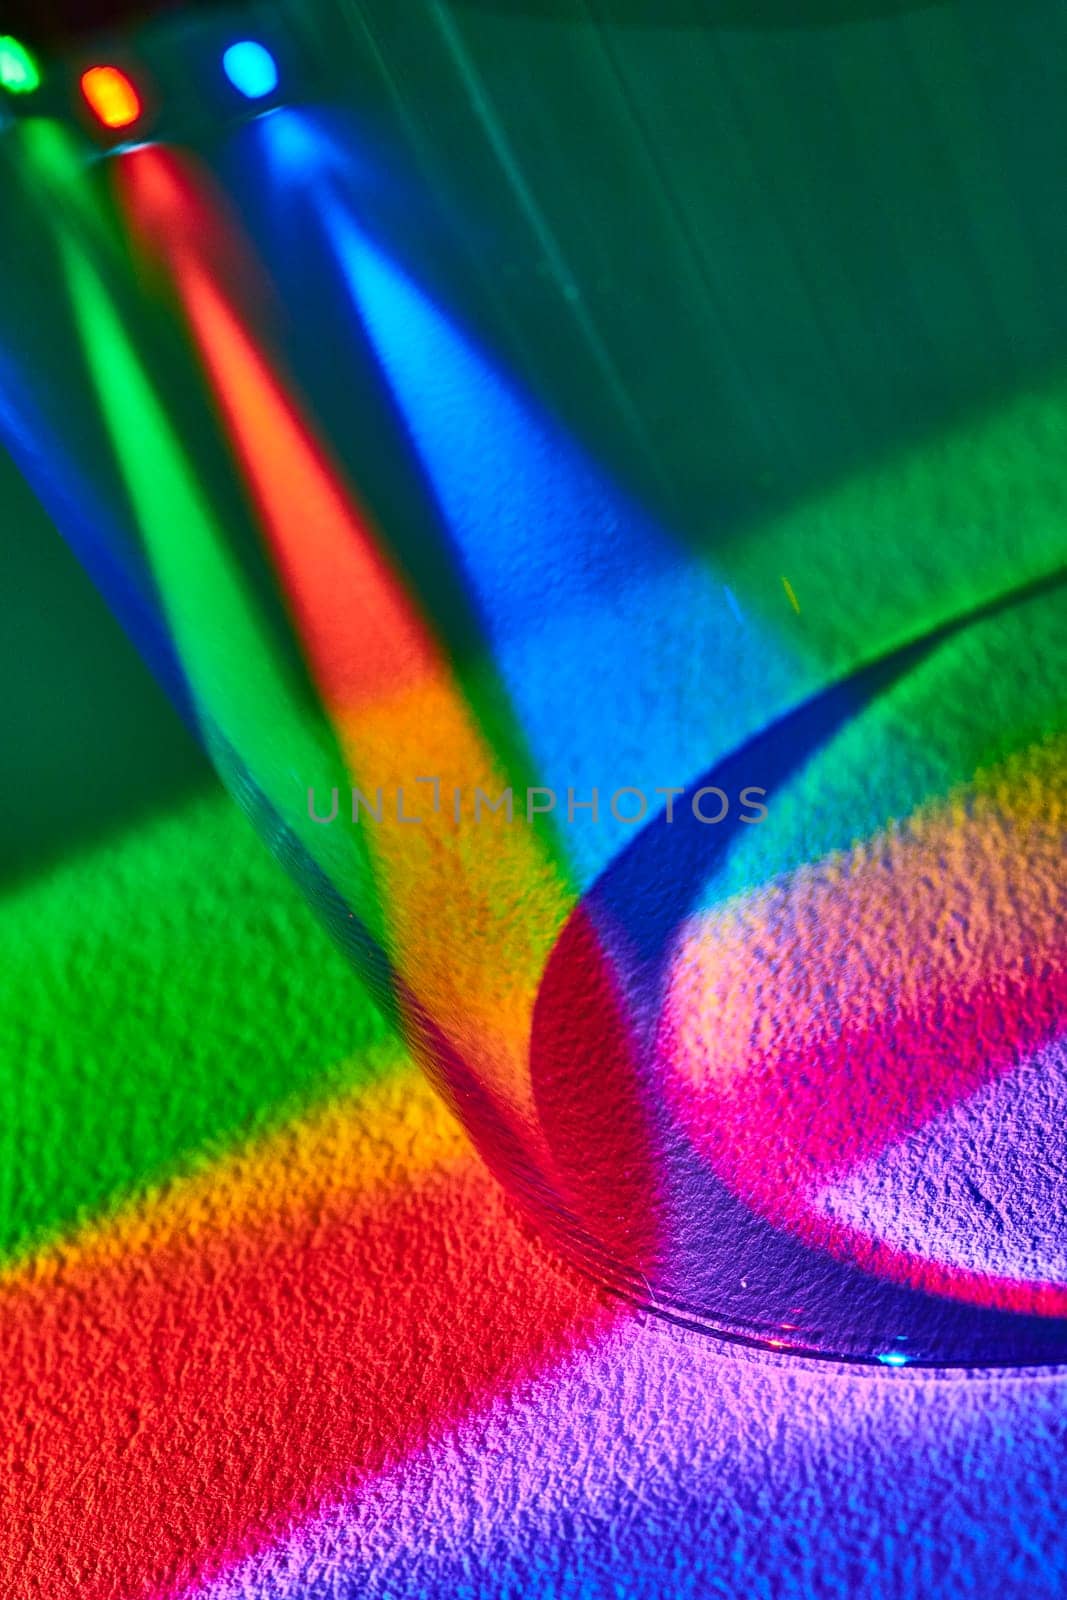 Vibrant Spectrum Through Glass in Fort Wayne - Abstract Macro Image Showcasing Color Theory and Rainbow Effect